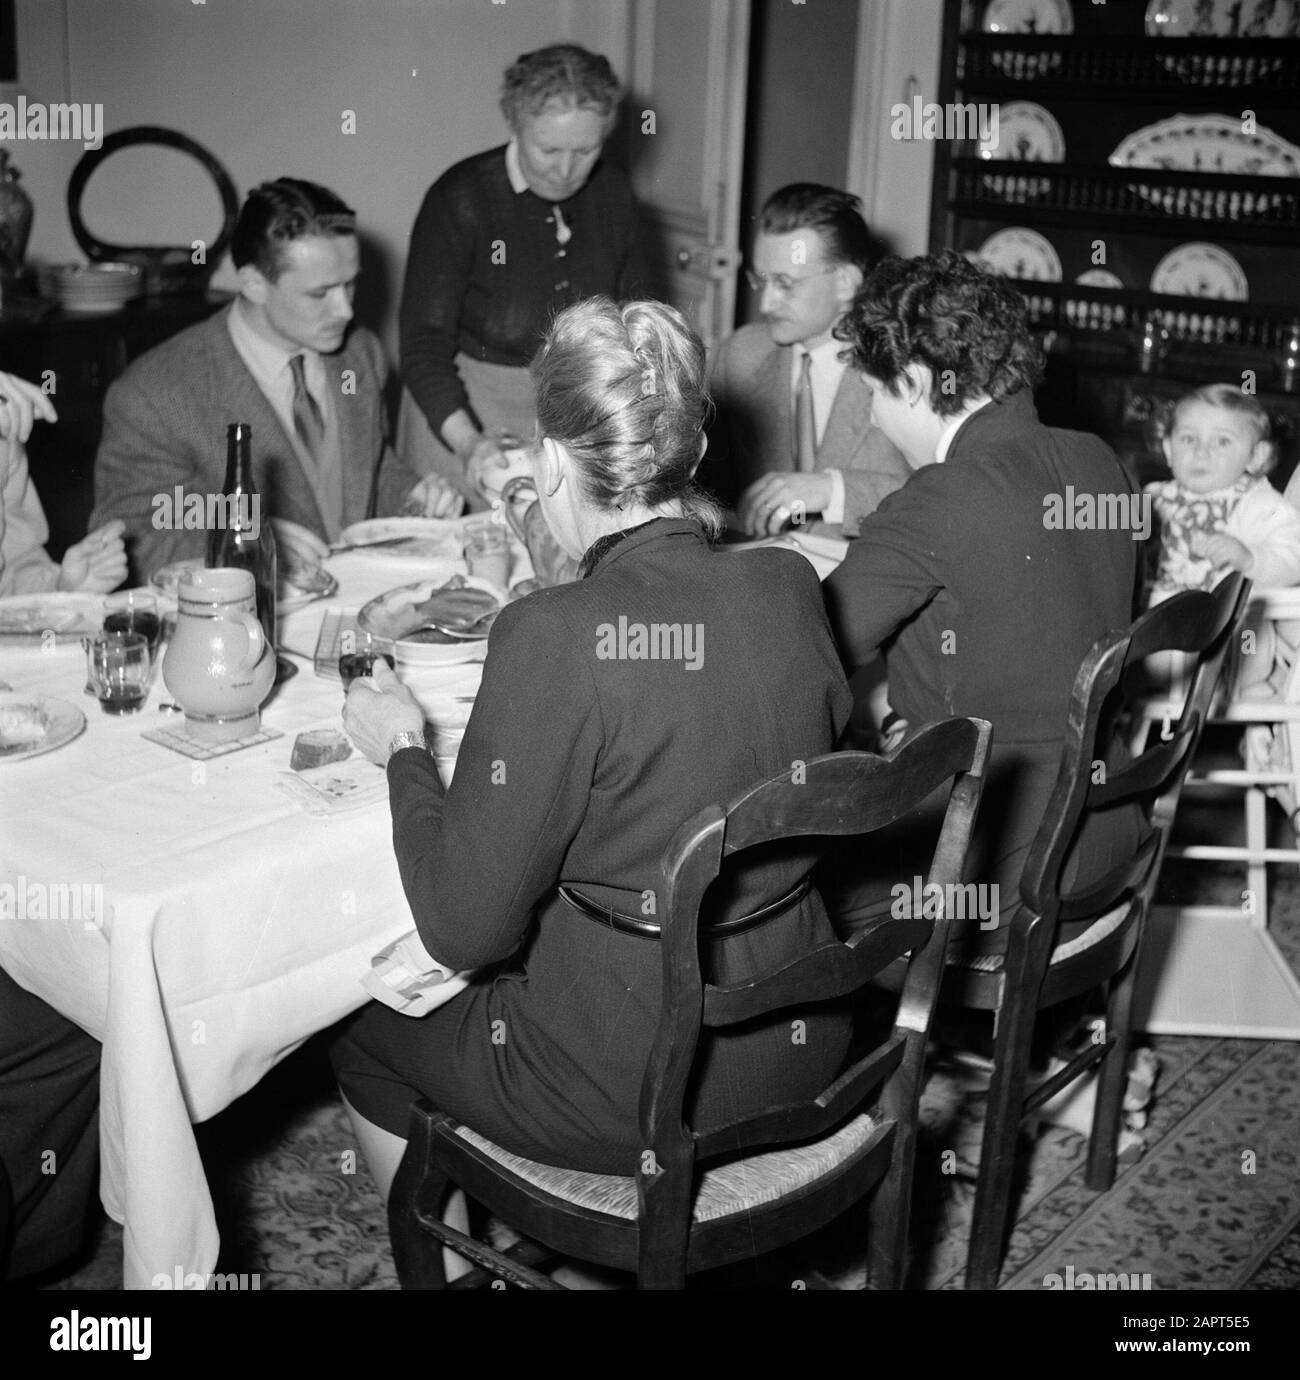 Residents of an apartment building in Paris  Family with guests at the meal Date: 1950 Location: France, Paris Keywords: families, bottles, meals Stock Photo